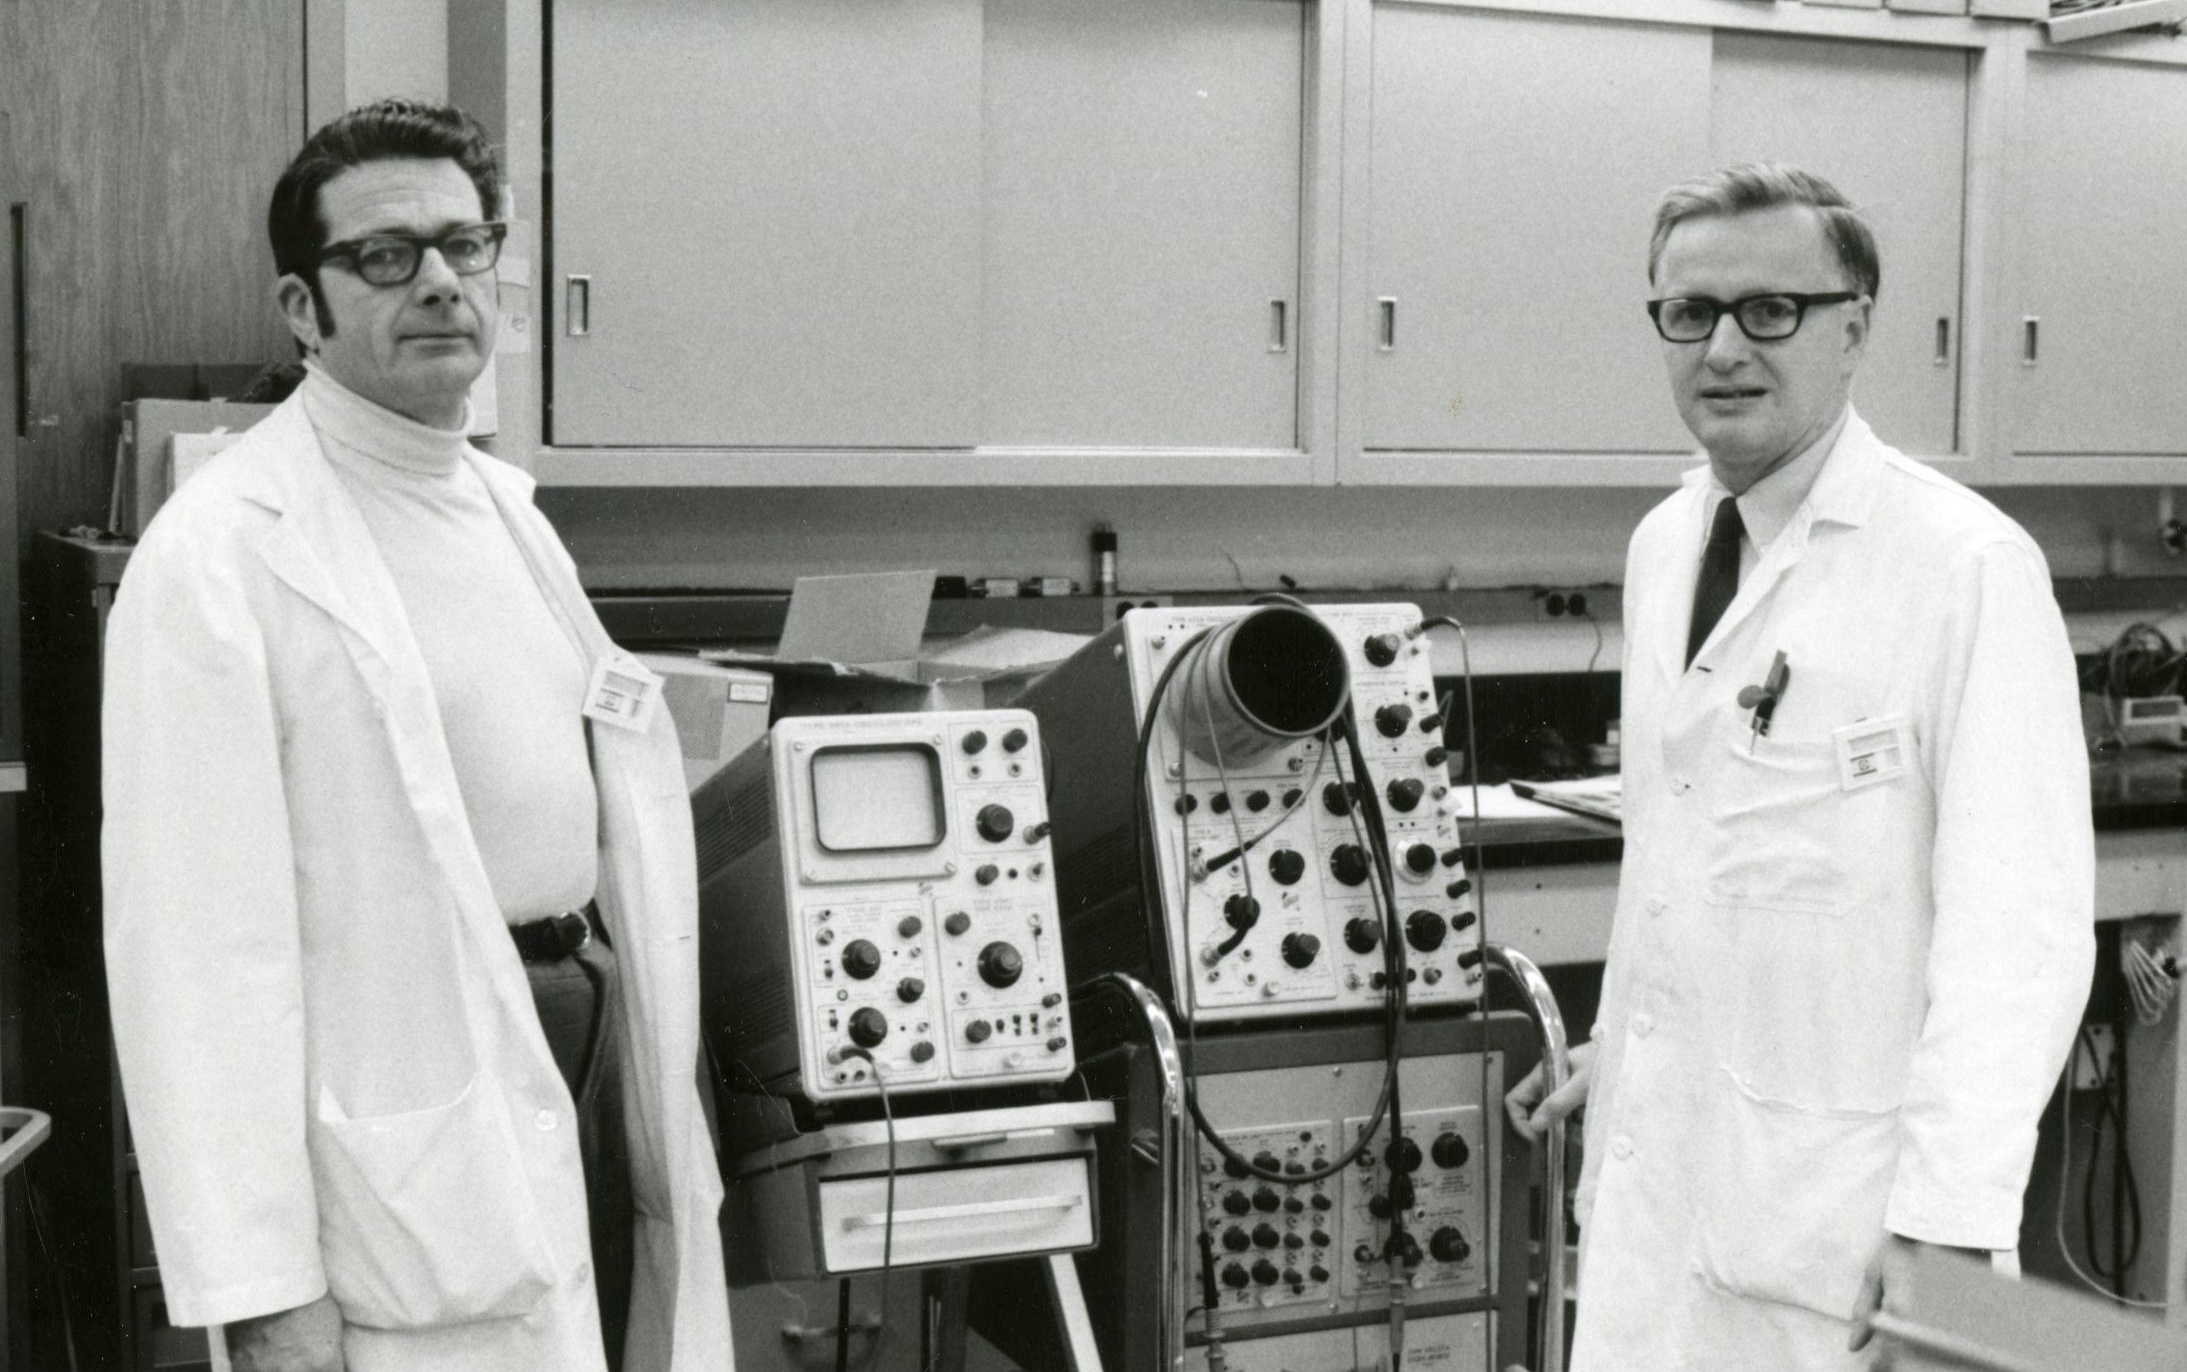 John McAfee MD, chairman of radiology and radiological sciences, 1965-1989, and Robert Richardson PhD, associate professor of radiology, in the nuclear medicine lab at Upstate University Hospital, circa 1970.